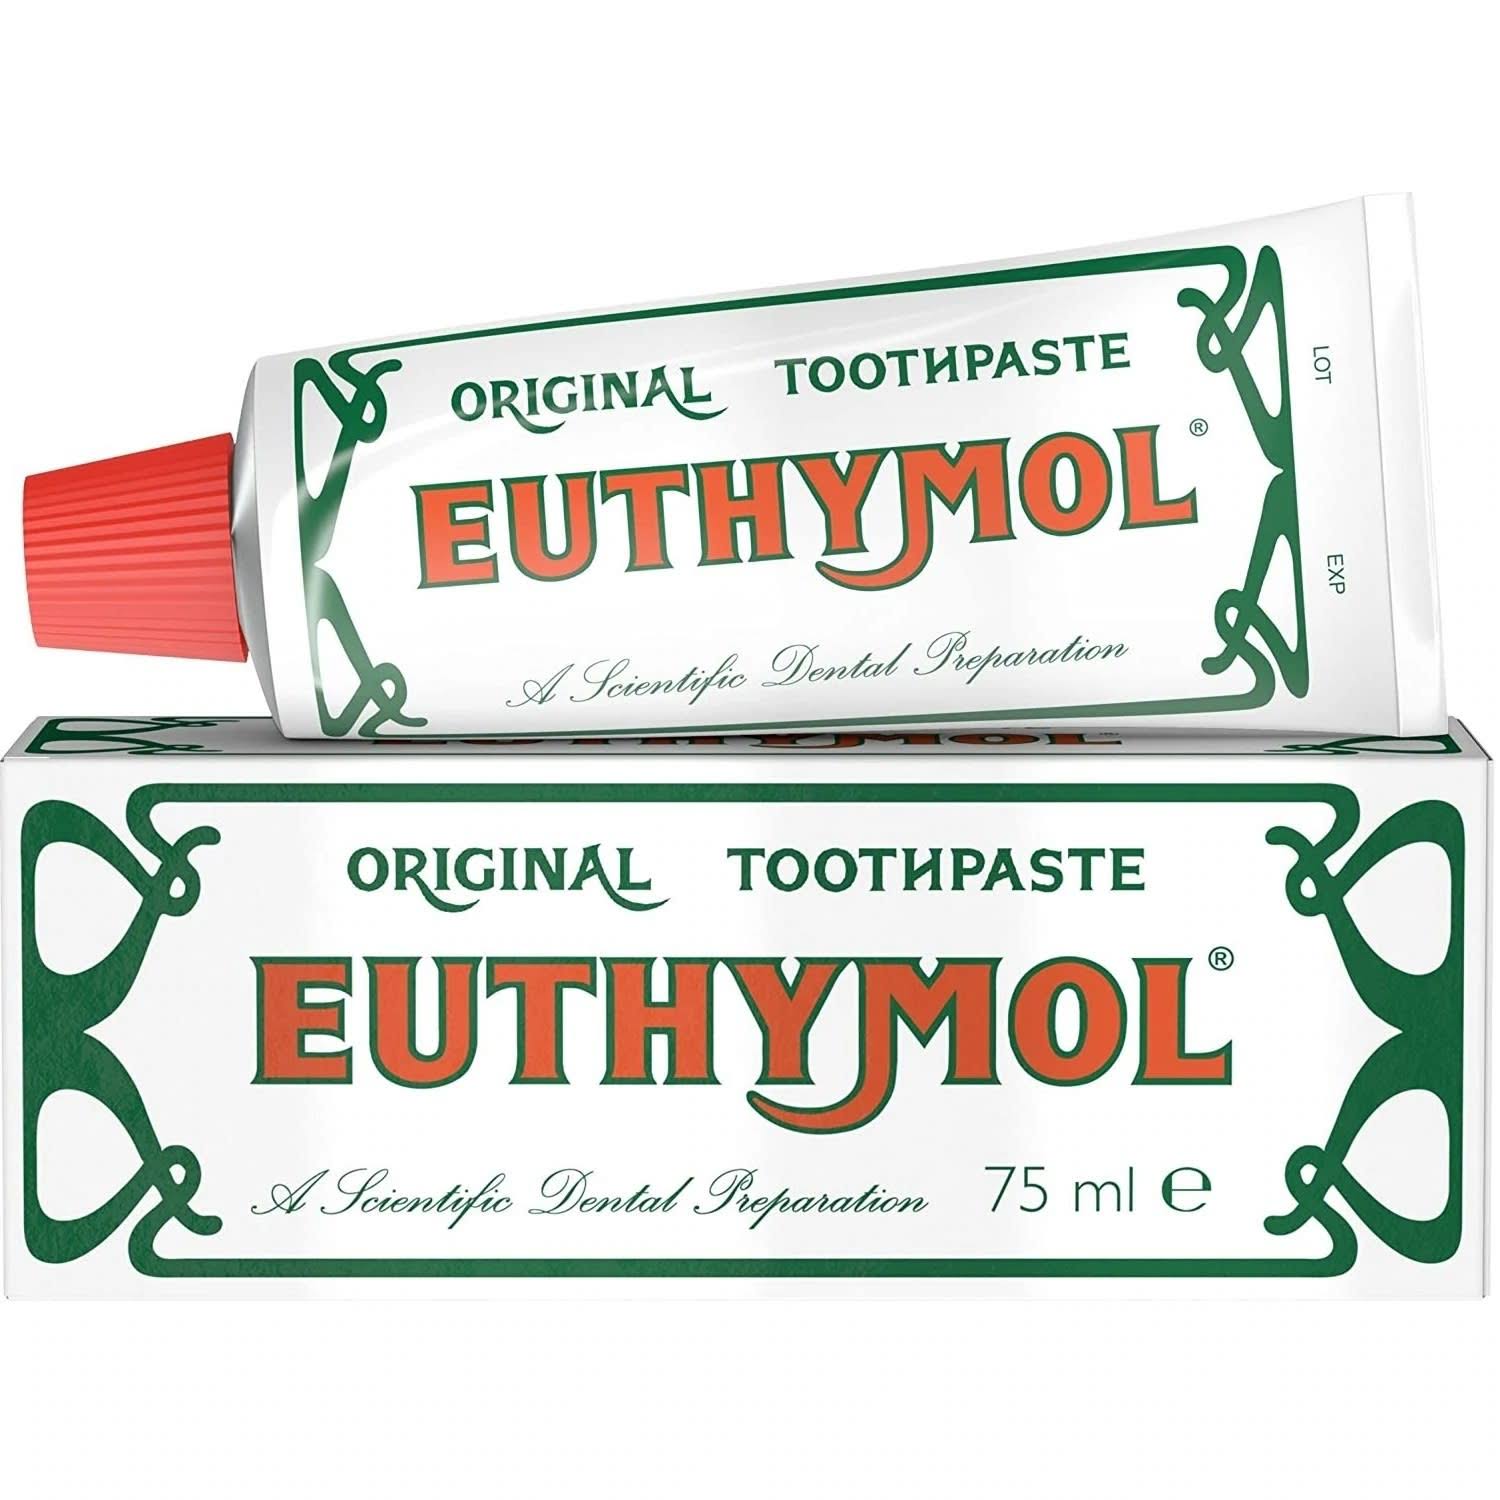 Euthymol Original Toothpaste 75ML by dpharmacy